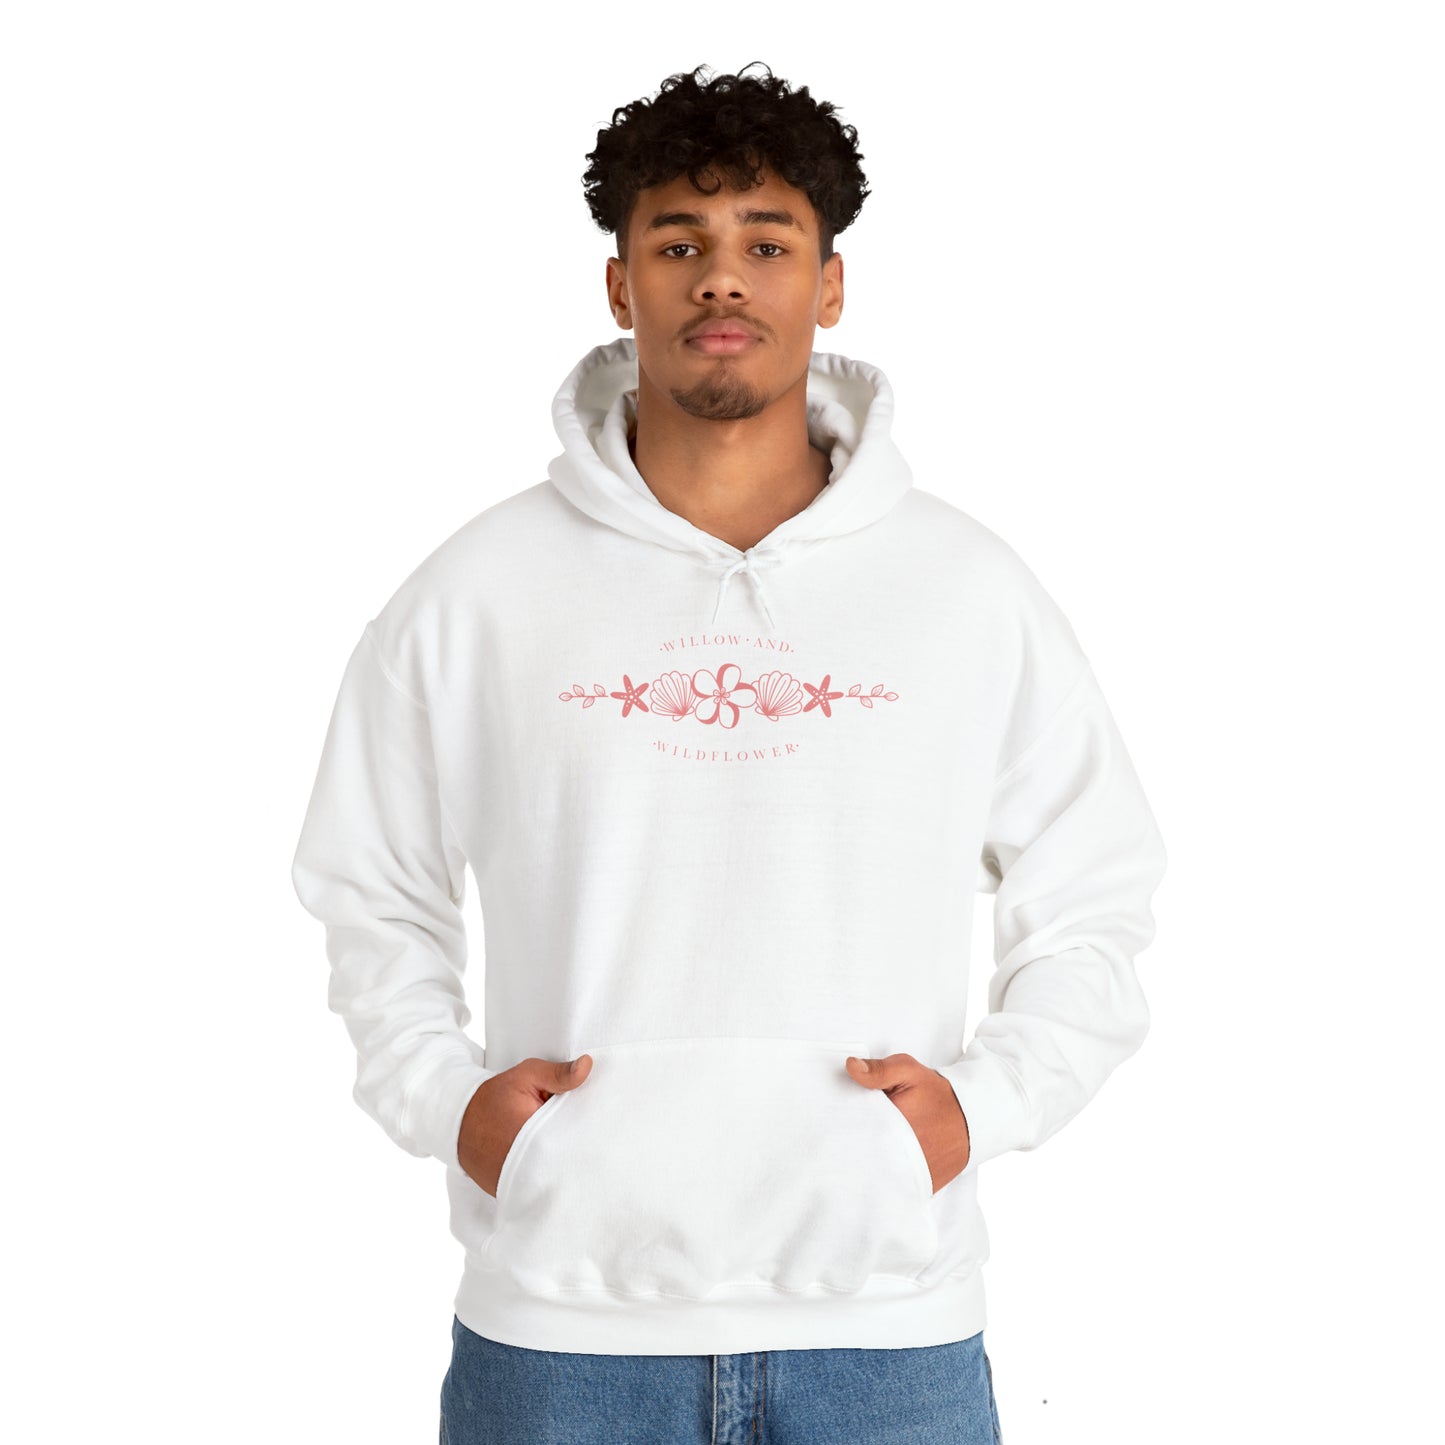 Sunsets - Hoodie - Coral